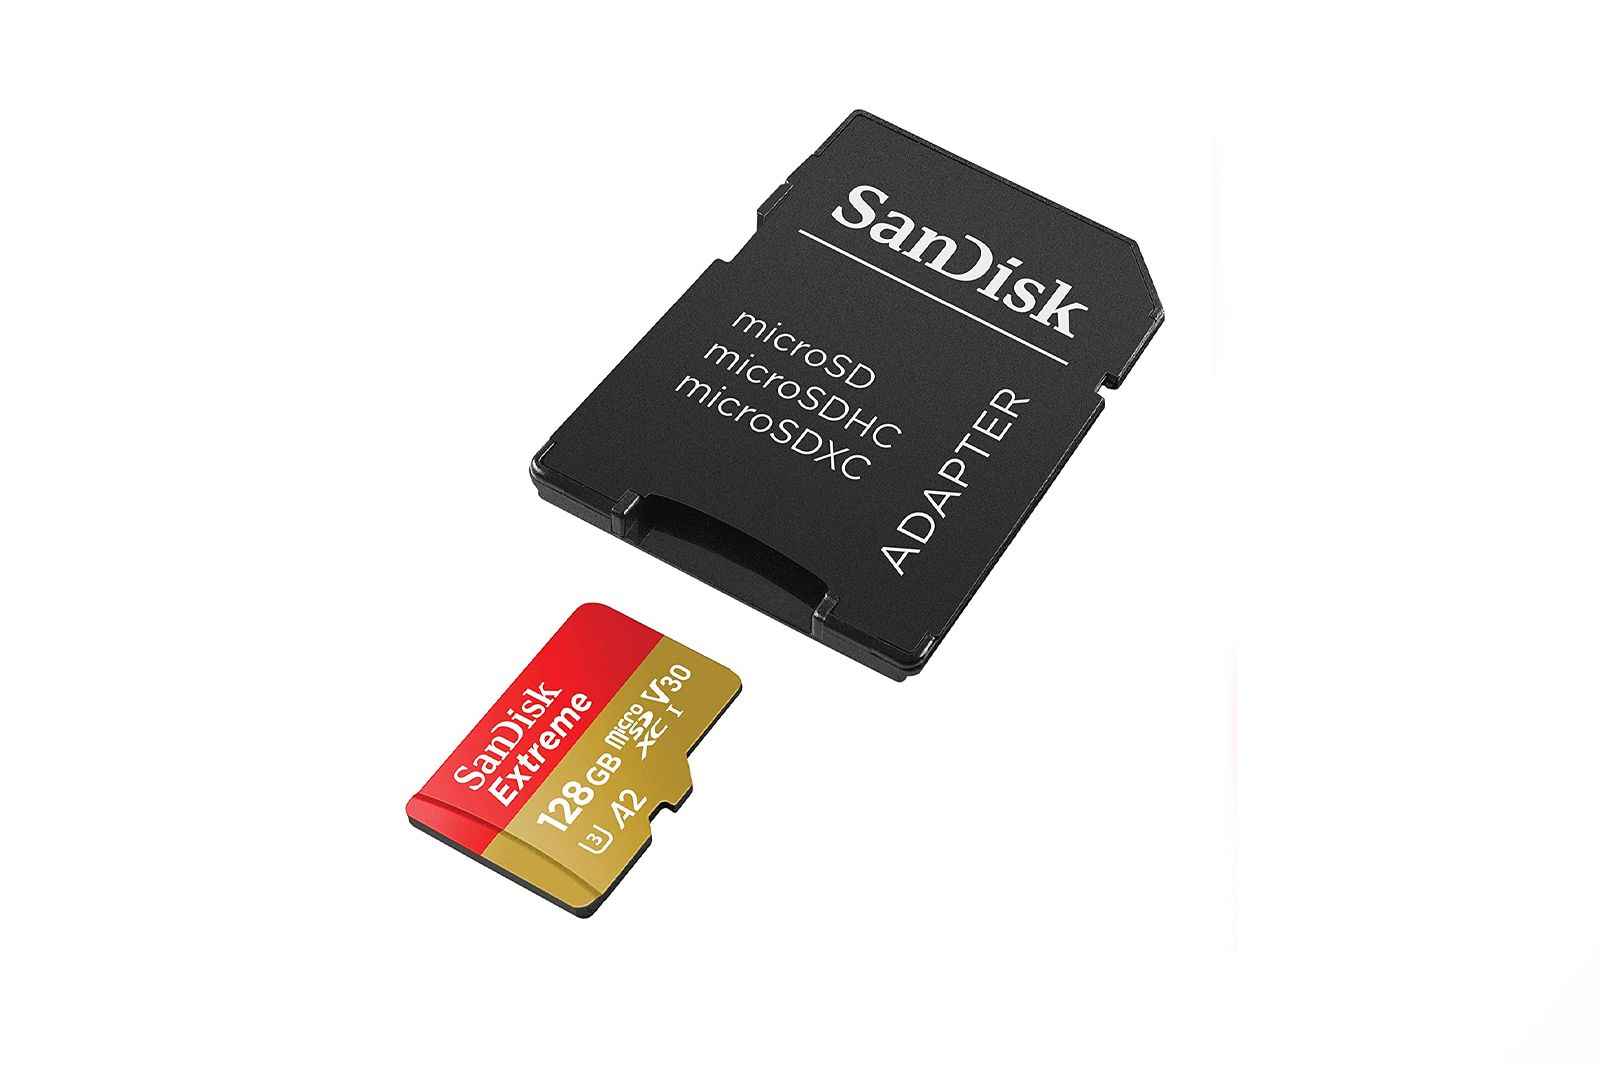 Currys offers great deals on these SanDisk memory cards photo 2